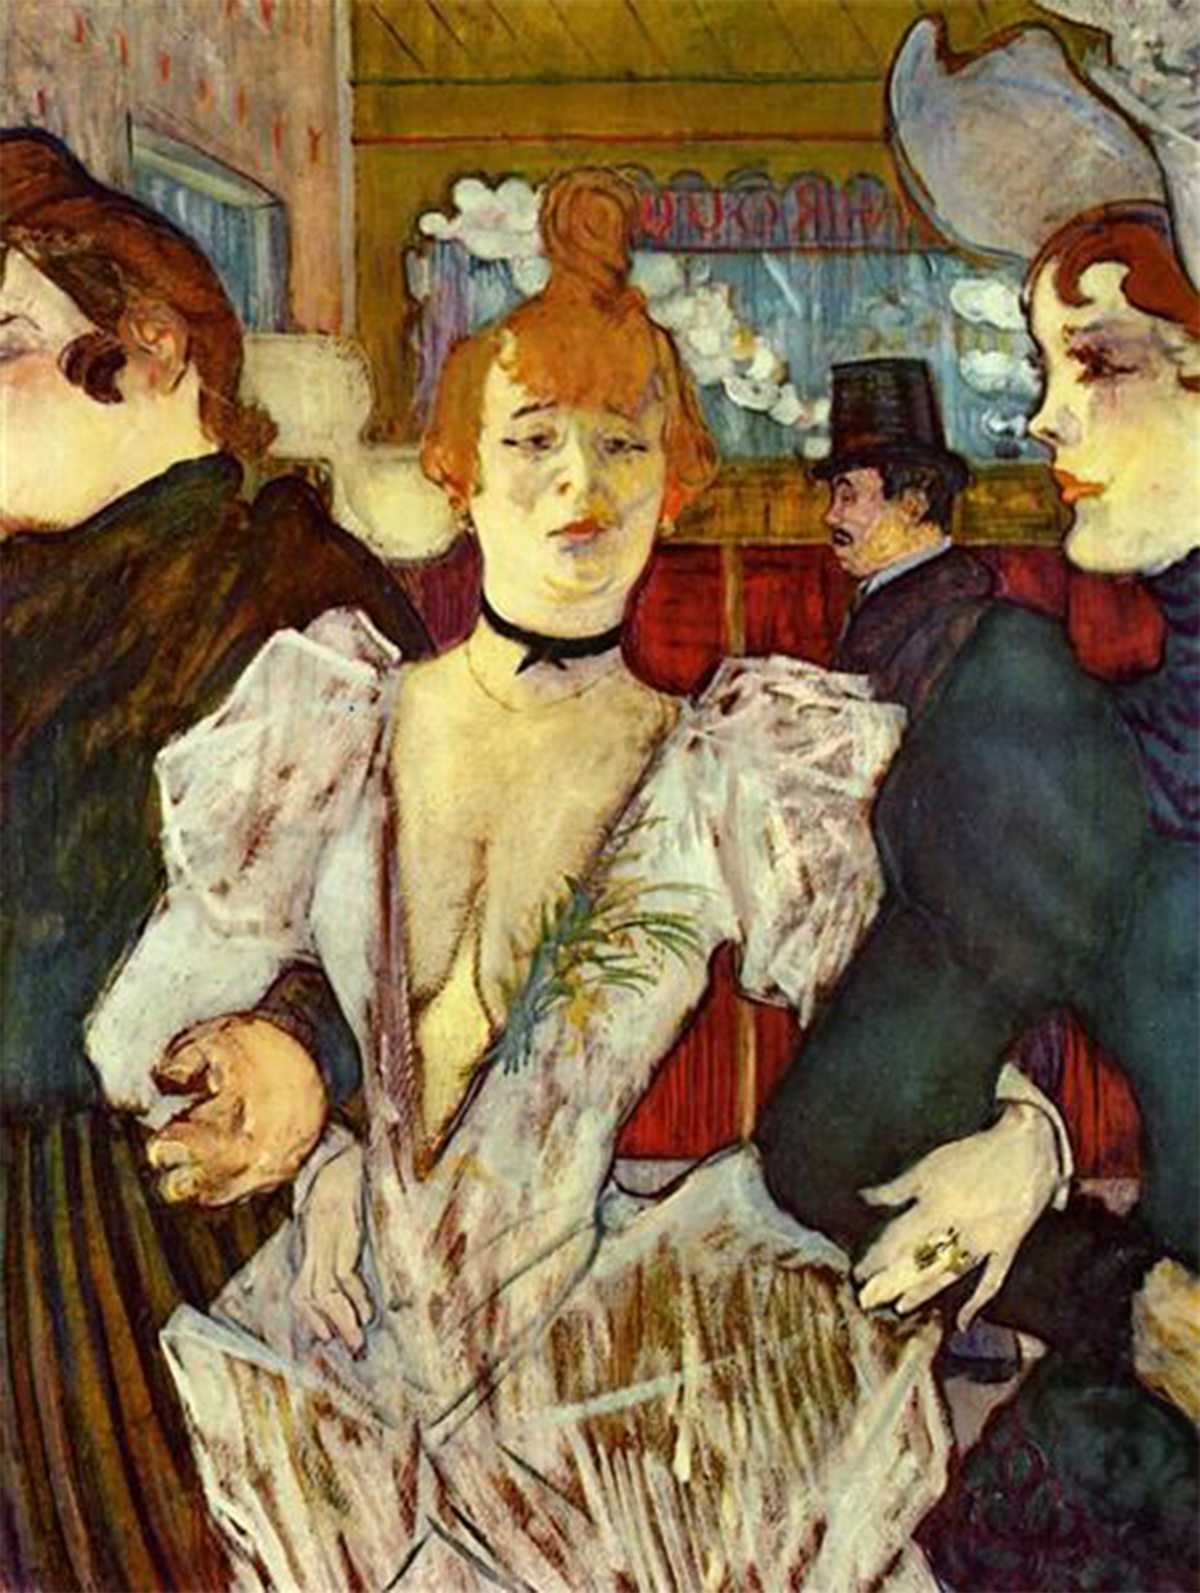 Henri de Toulouse-Lautrec, La Goulue Arriving at the Moulin Rouge with Two Women, 1892, oil on board, The Museum of Modern Art